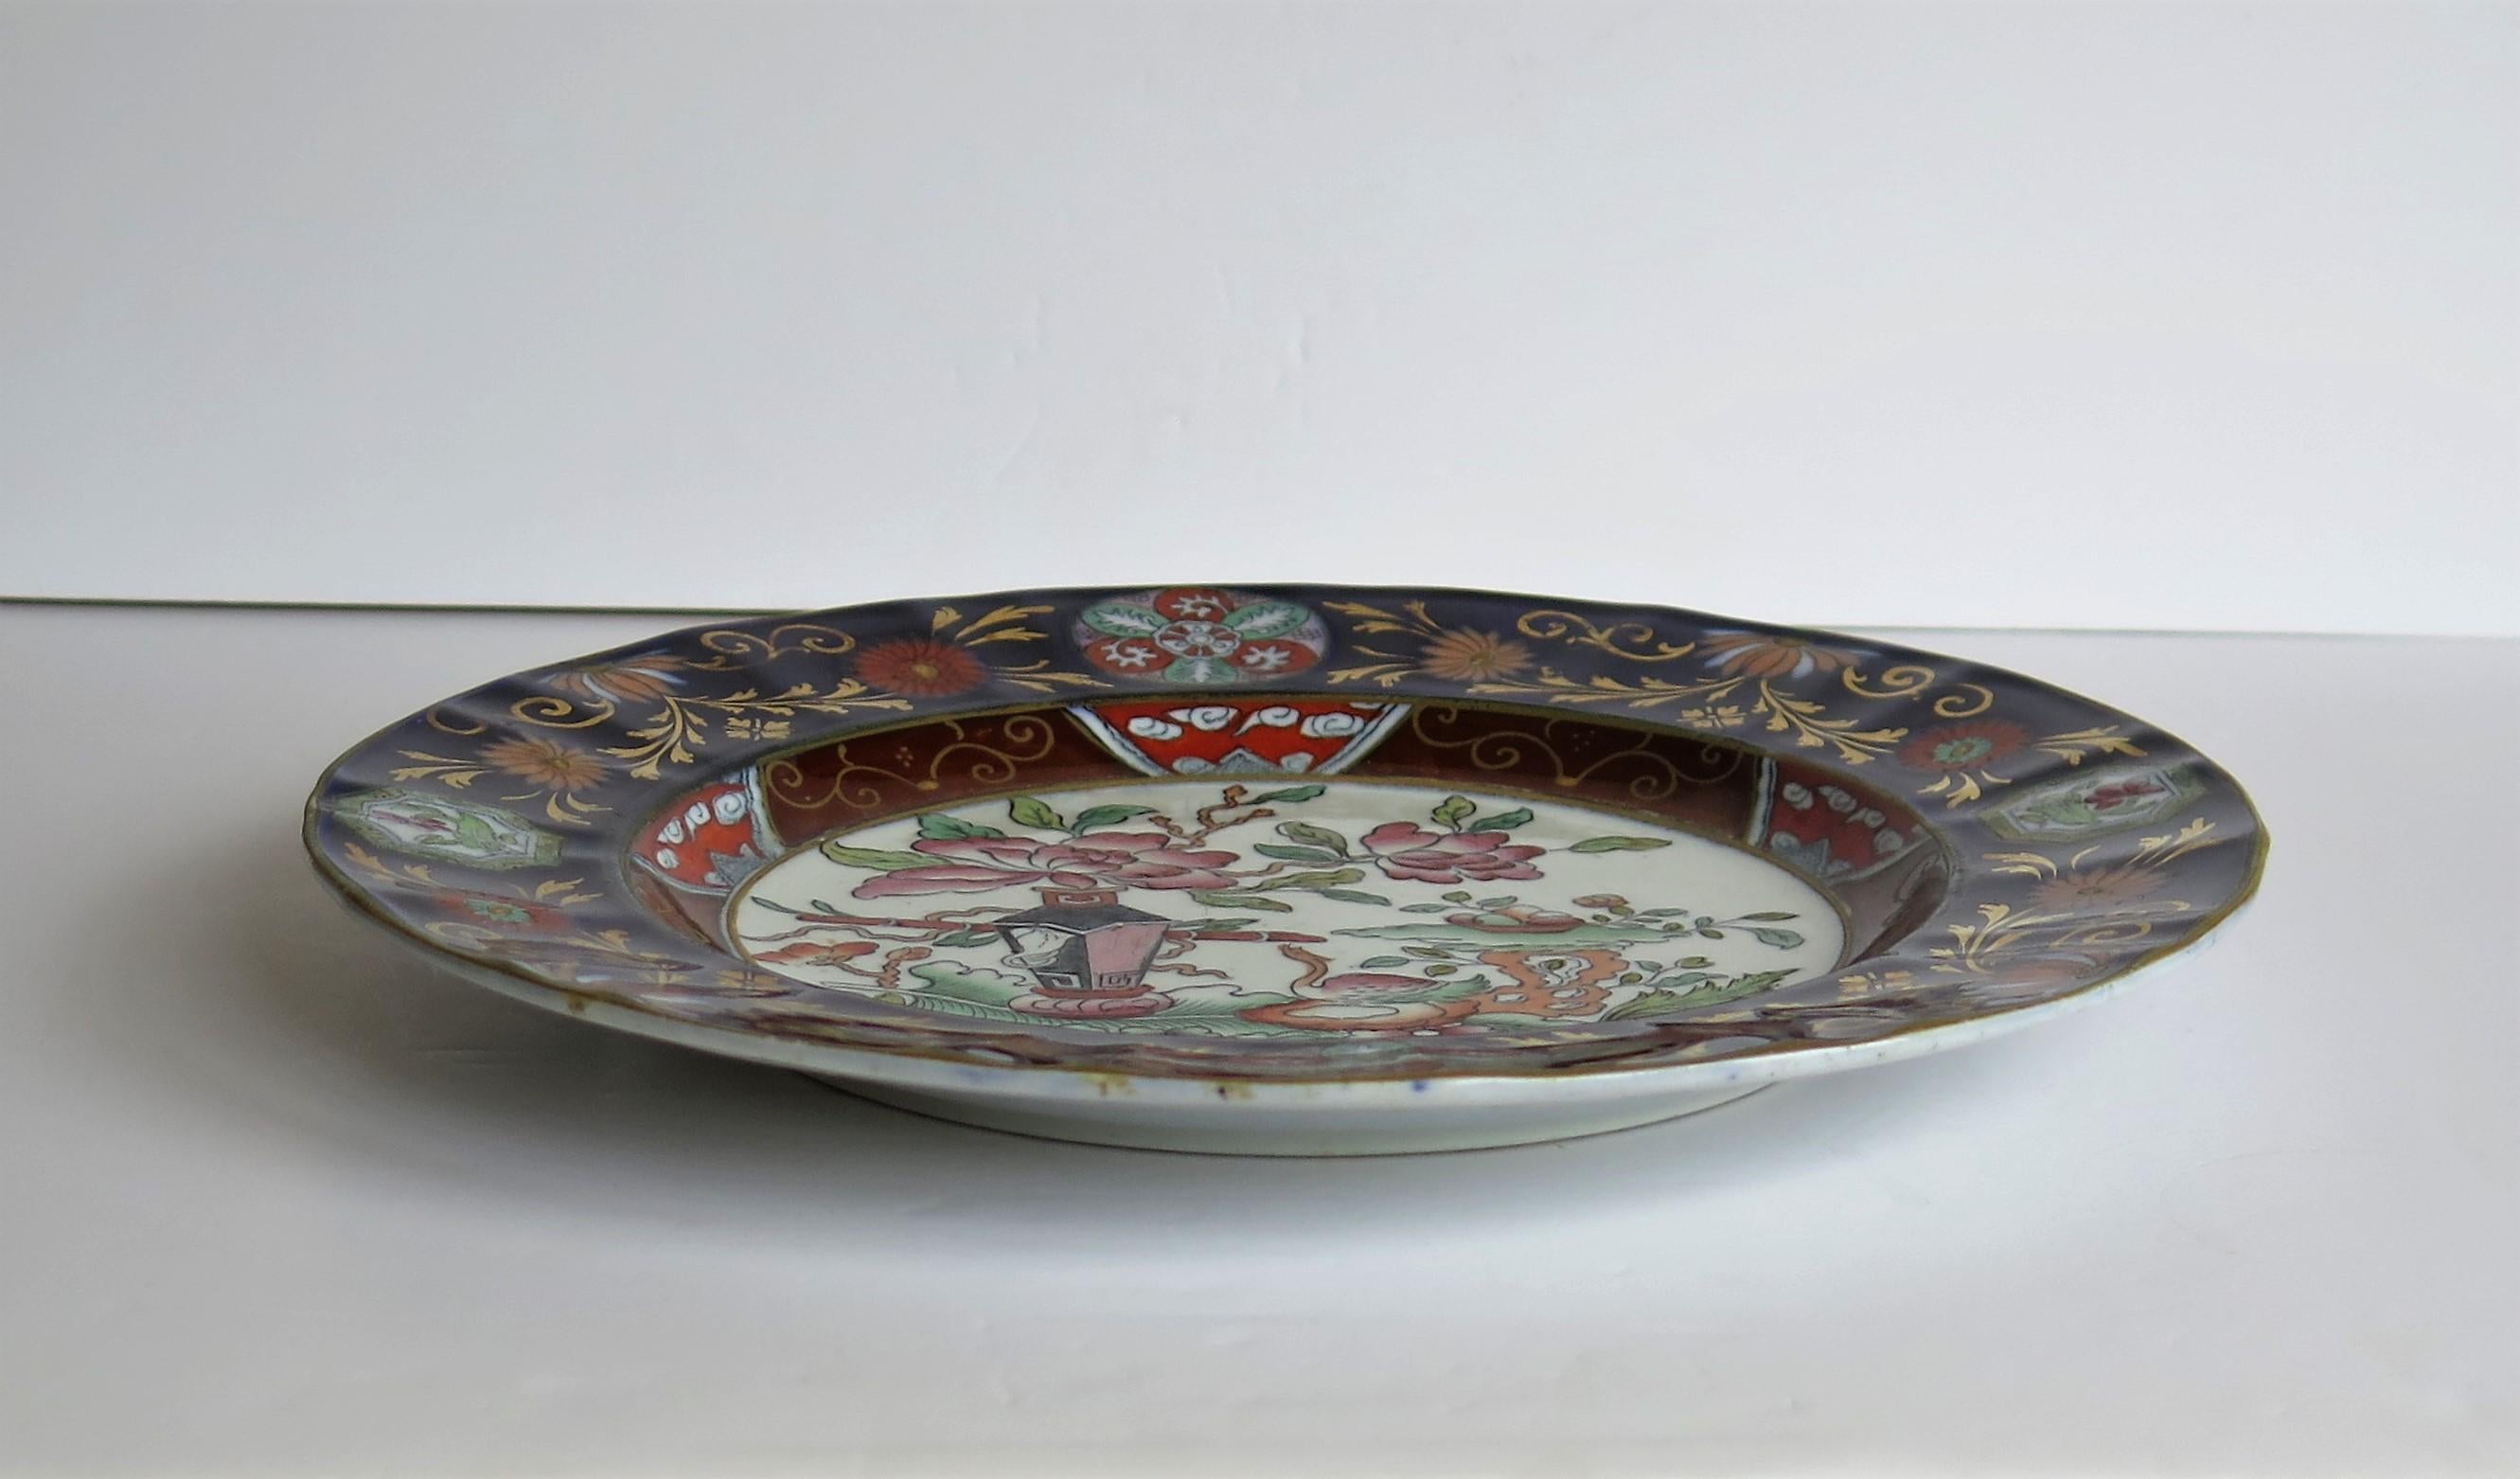 Masons' Ashworths Large Dinner Plate in Table and Flower Pot Pattern, circa 1875 For Sale 2